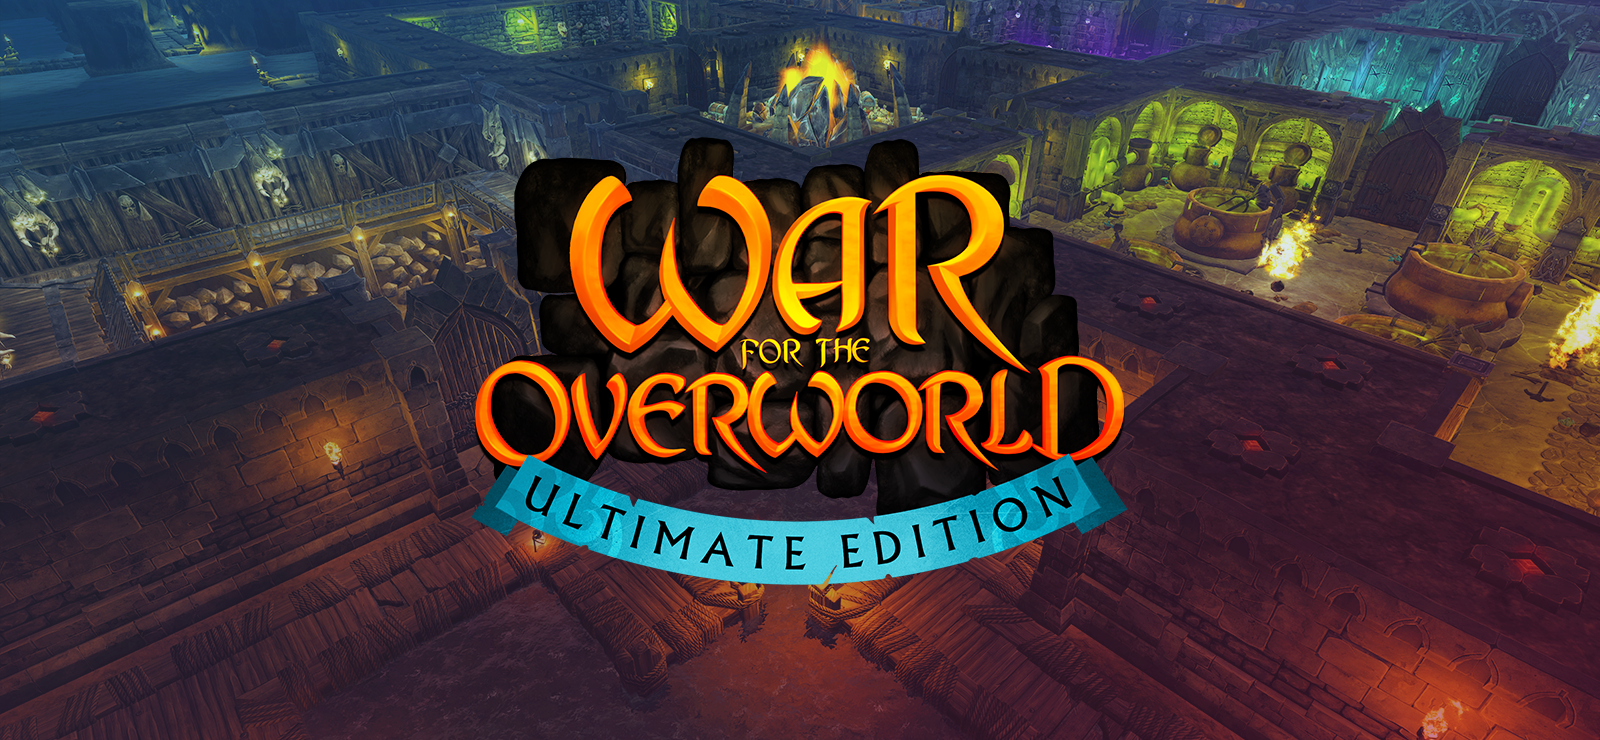 War For The Overworld Ultimate Edition